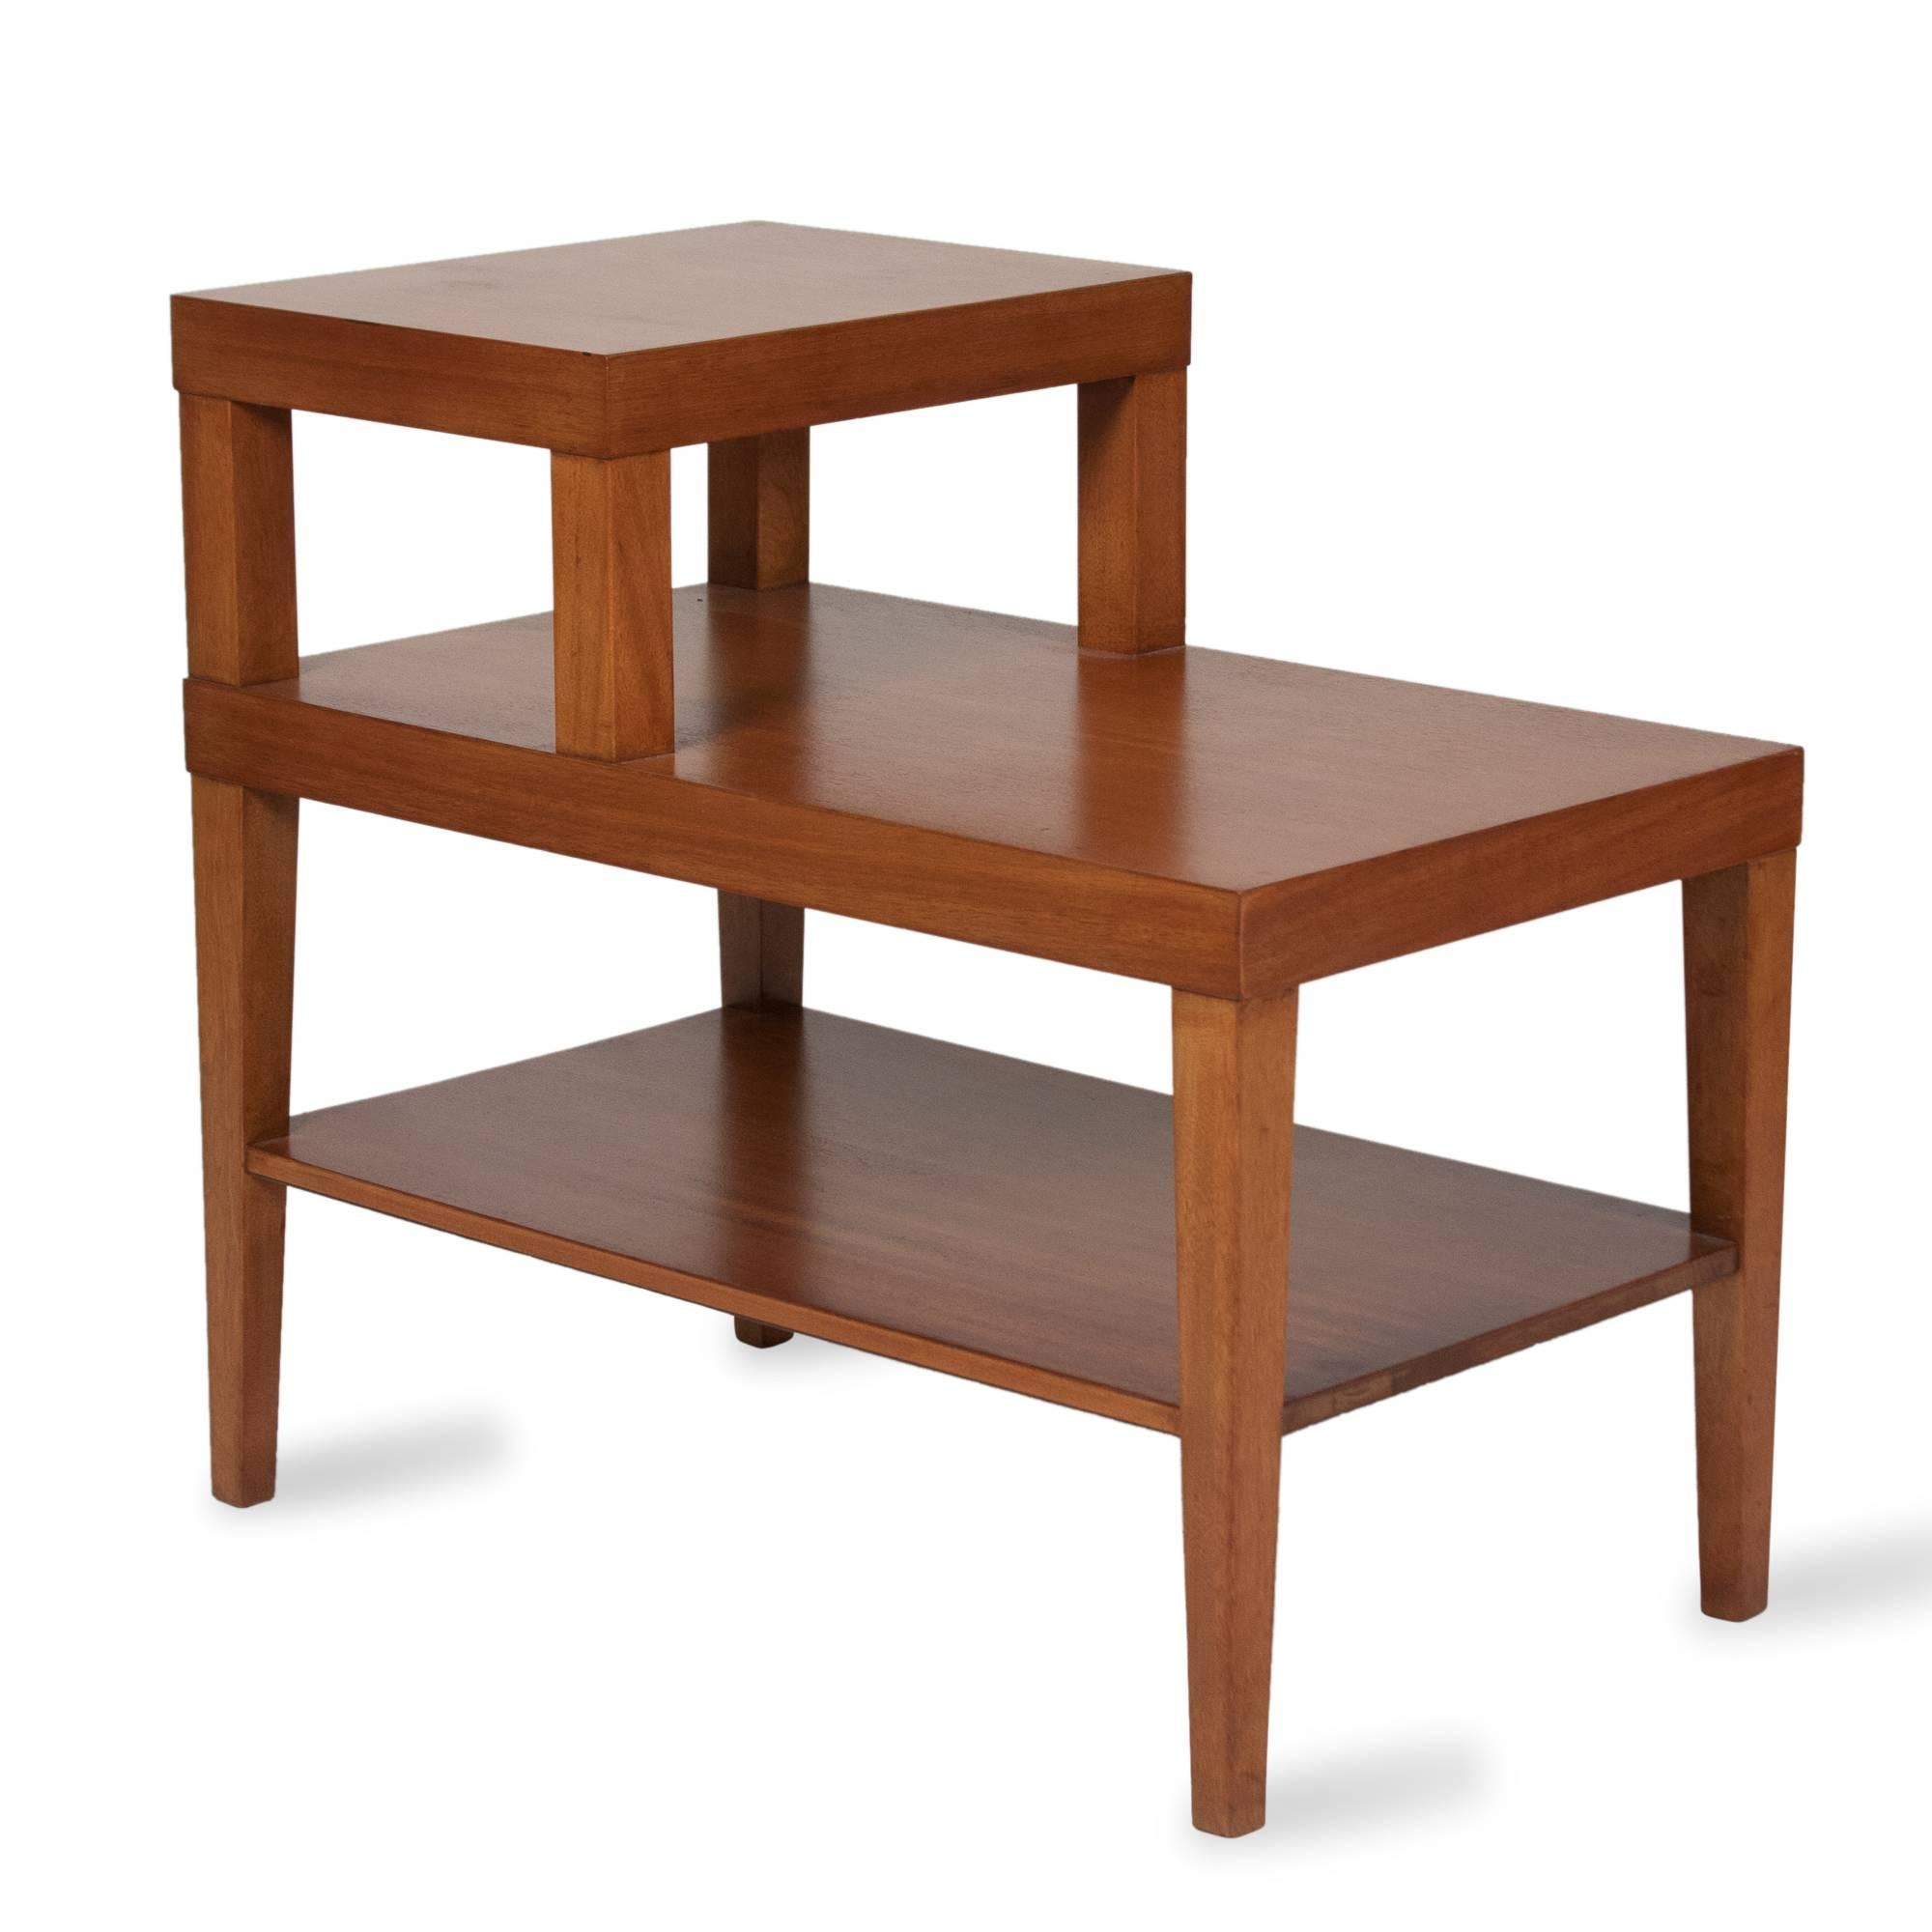 Mid-20th Century Pair of Walnut Tiered End Tables, American, 1960s